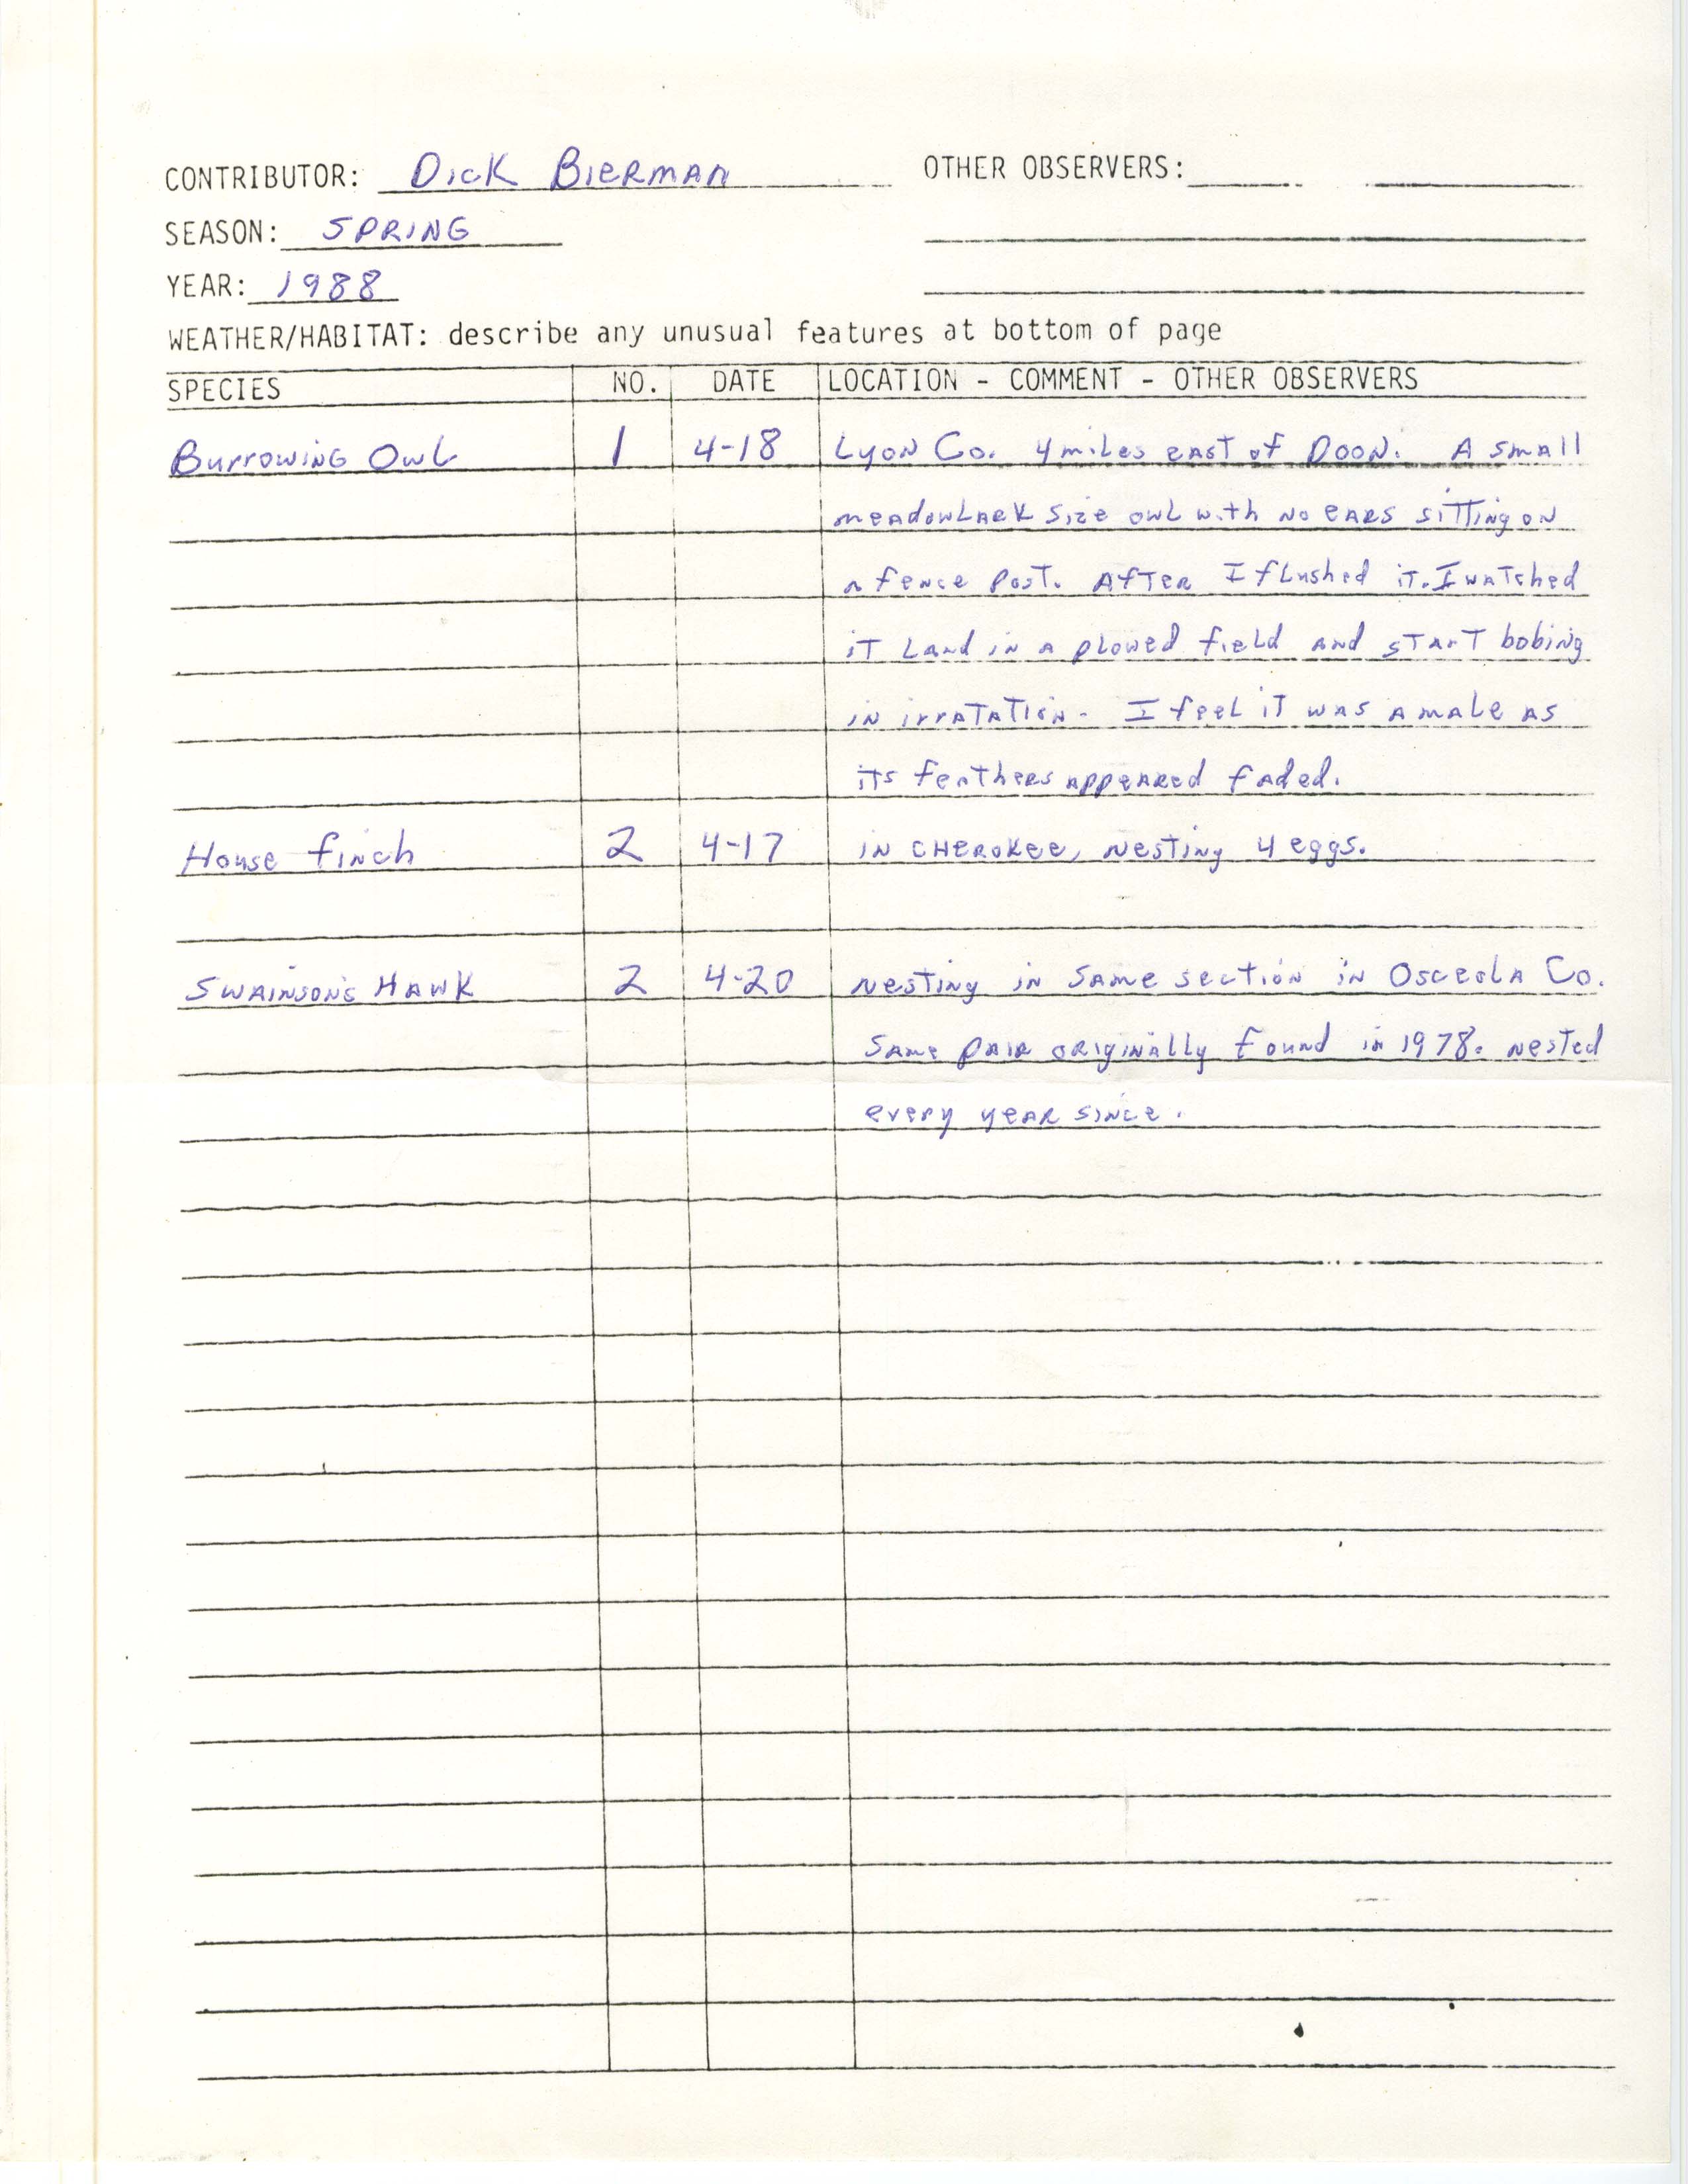 Field notes contributed by Dick Bierman, spring 1988